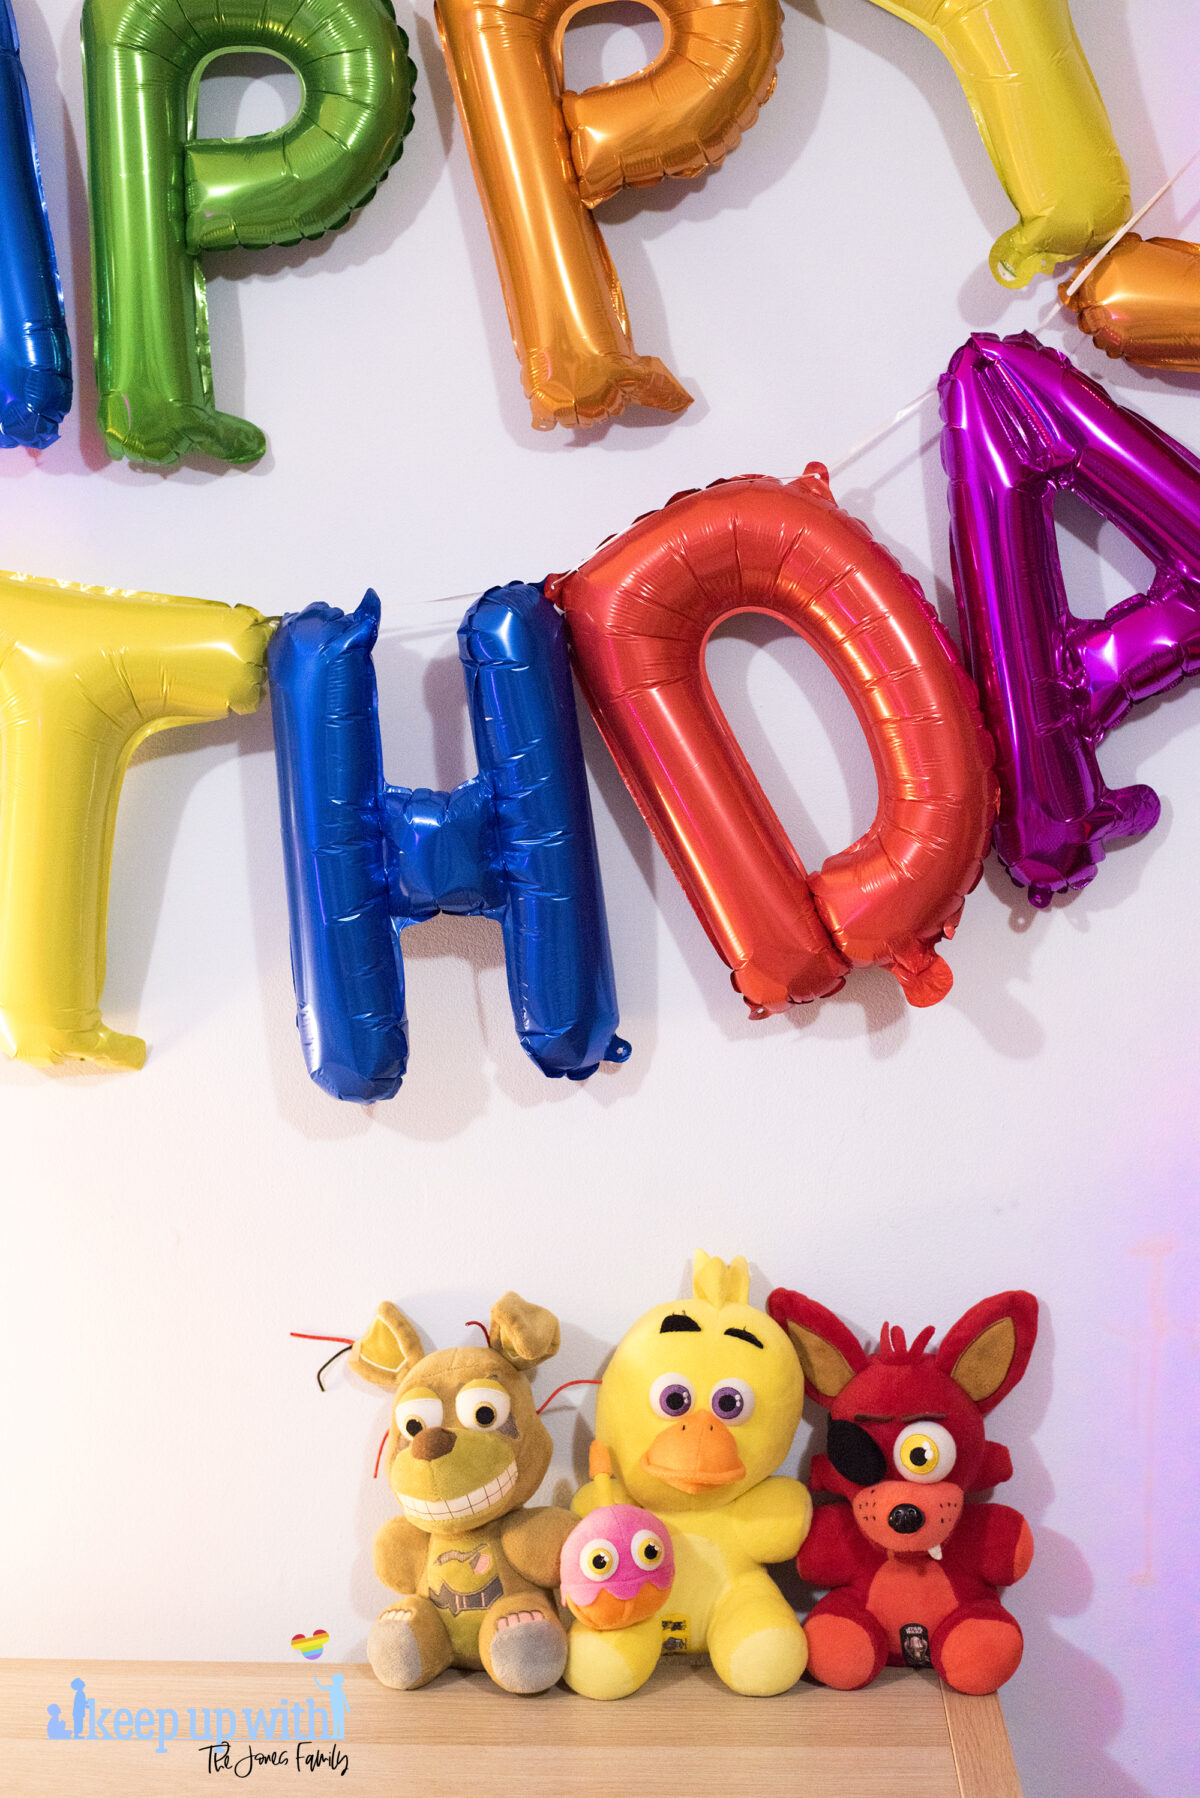 Image shows three Five Nights at Freddy's large plush toys. Foxy, Chica and Springtrap. They are sat on a wooden sideboard against a pale blue wall and the coloured happy birthday balloons are on the wall in the background. Image by keep up with the jones family.